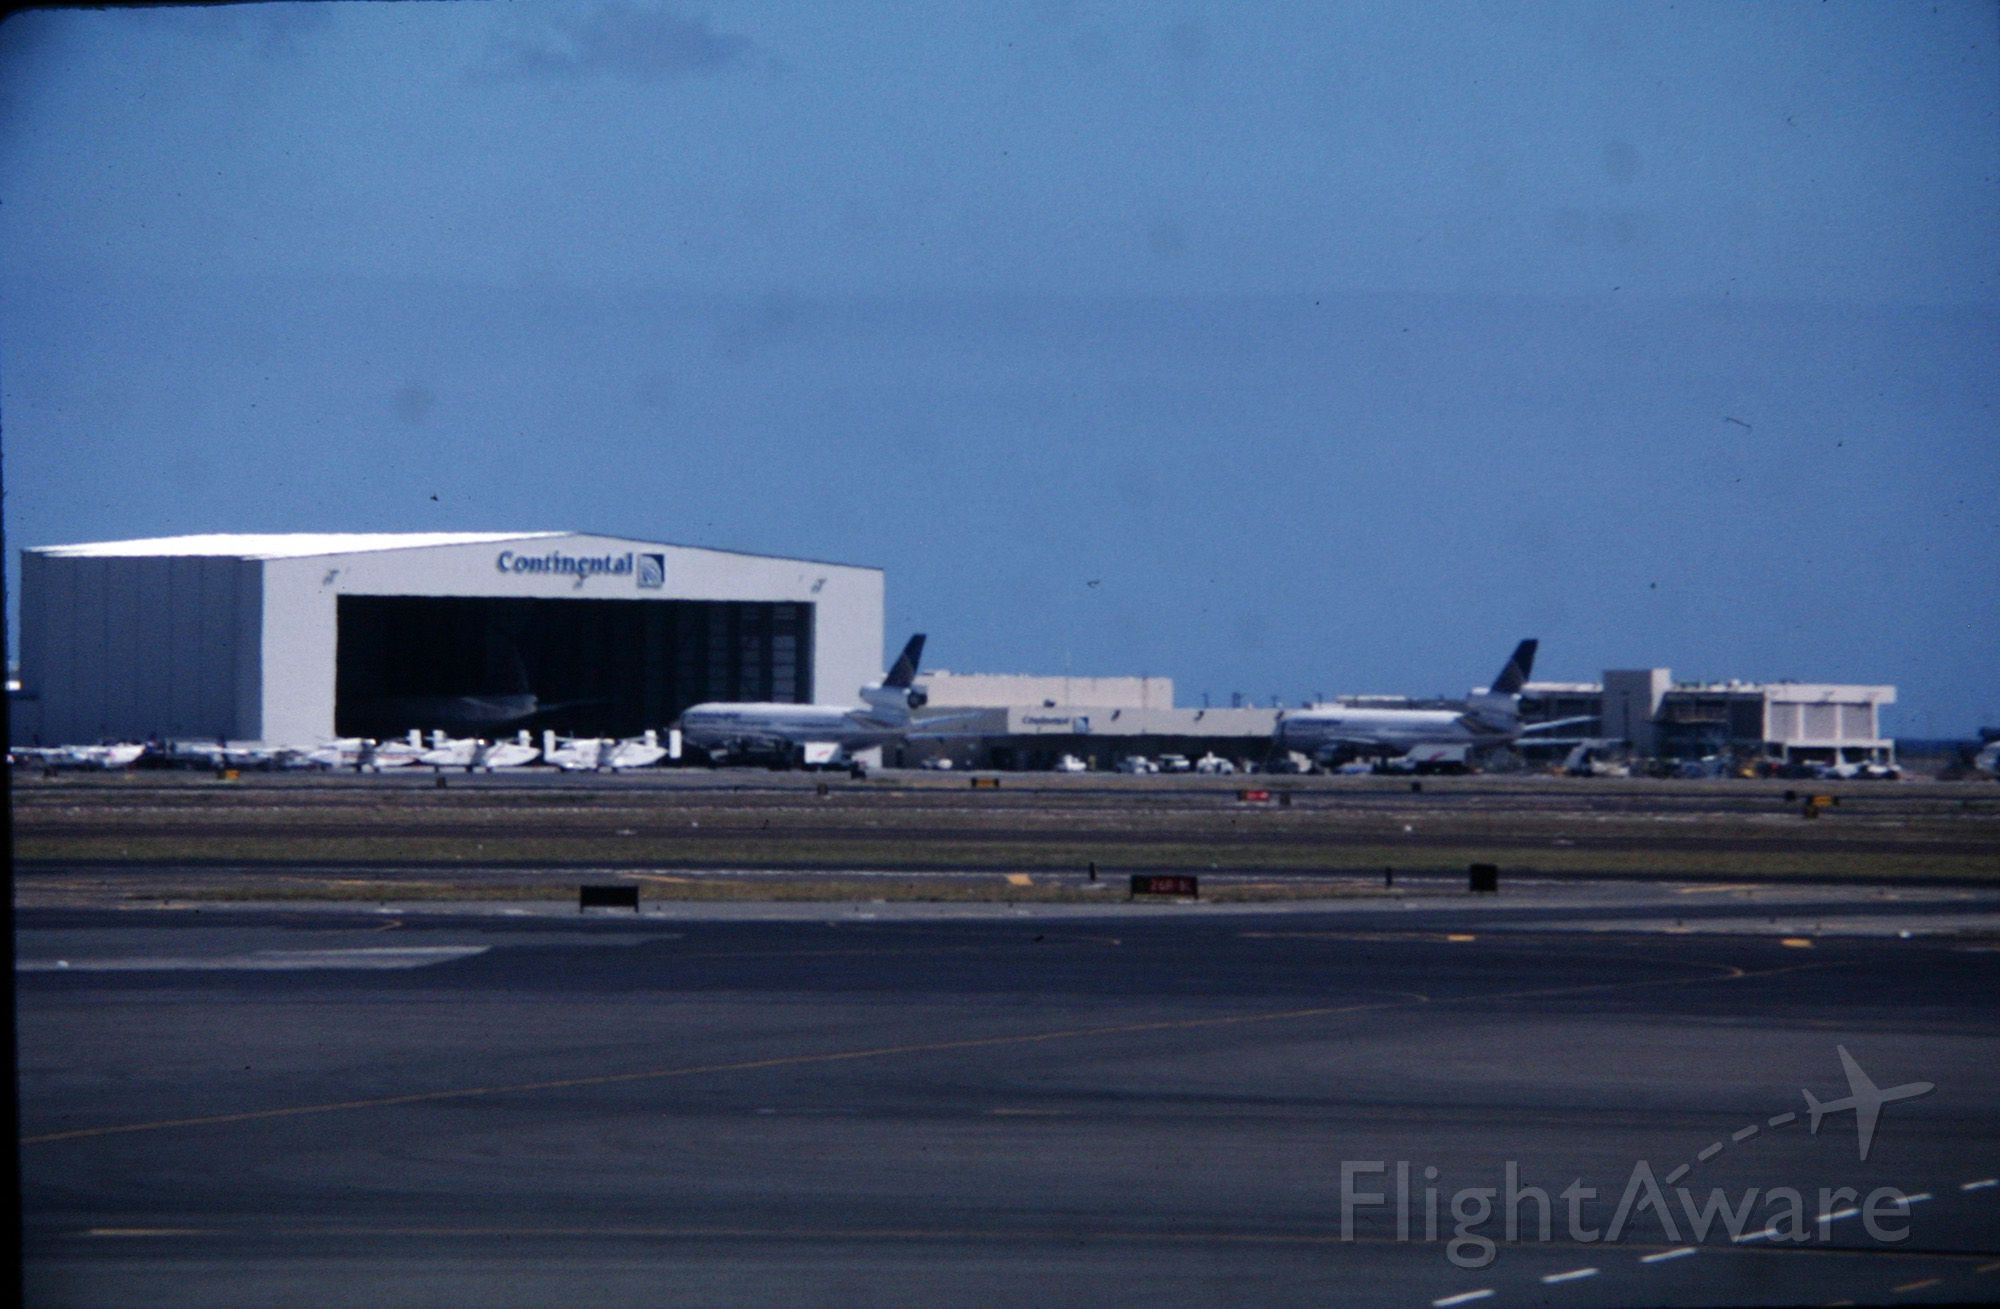 McDonnell Douglas DC-10 — - HNL - Continentals hangar base at Honolulu in this Aug 1998 view.